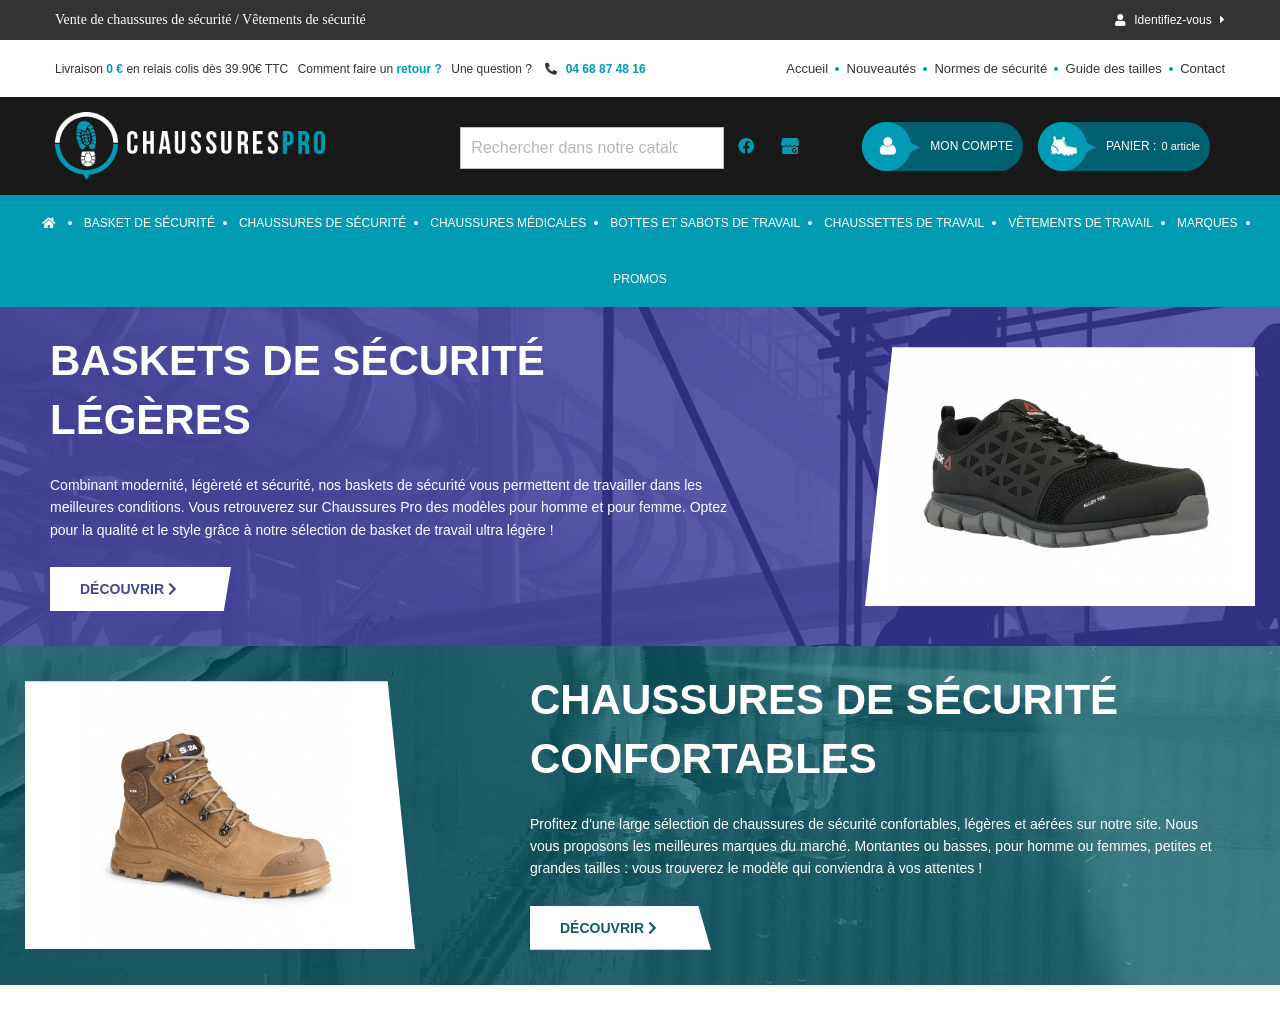 www.chaussures-pro.fr